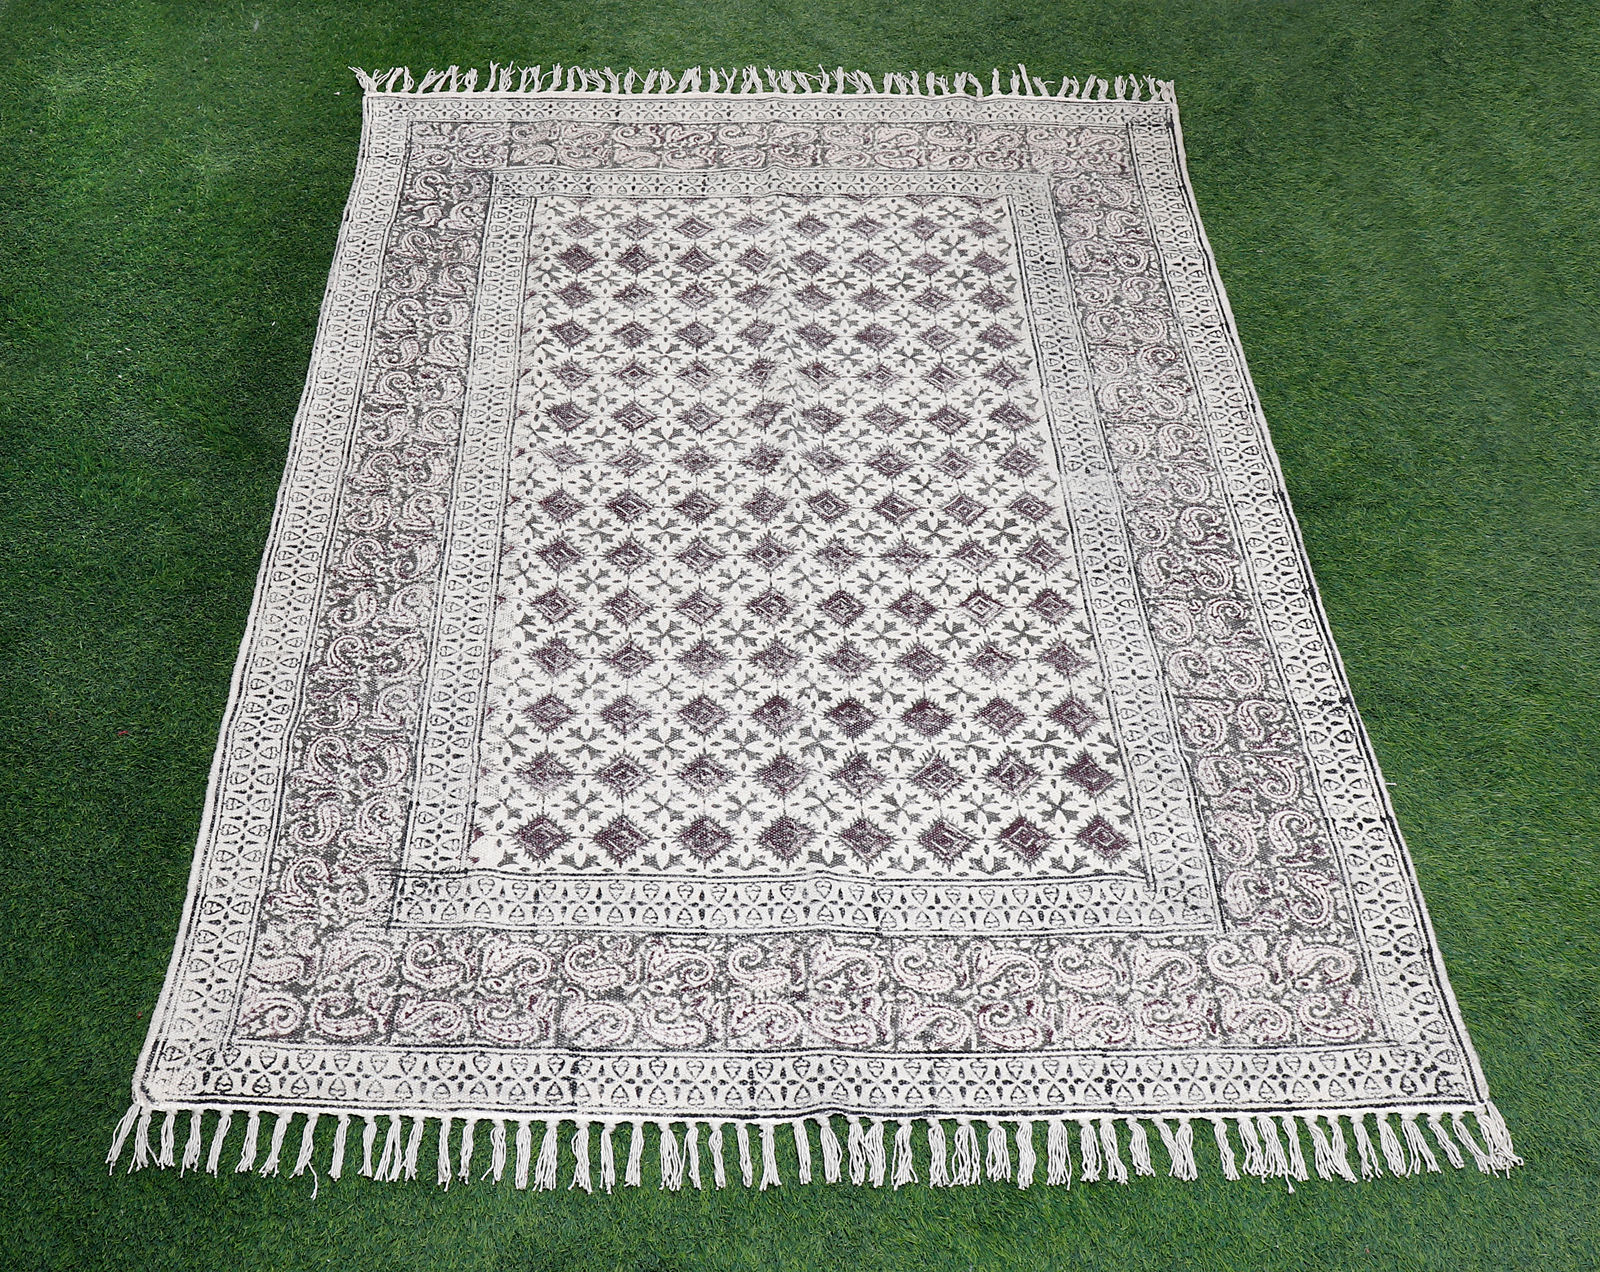 Hand woven rugs